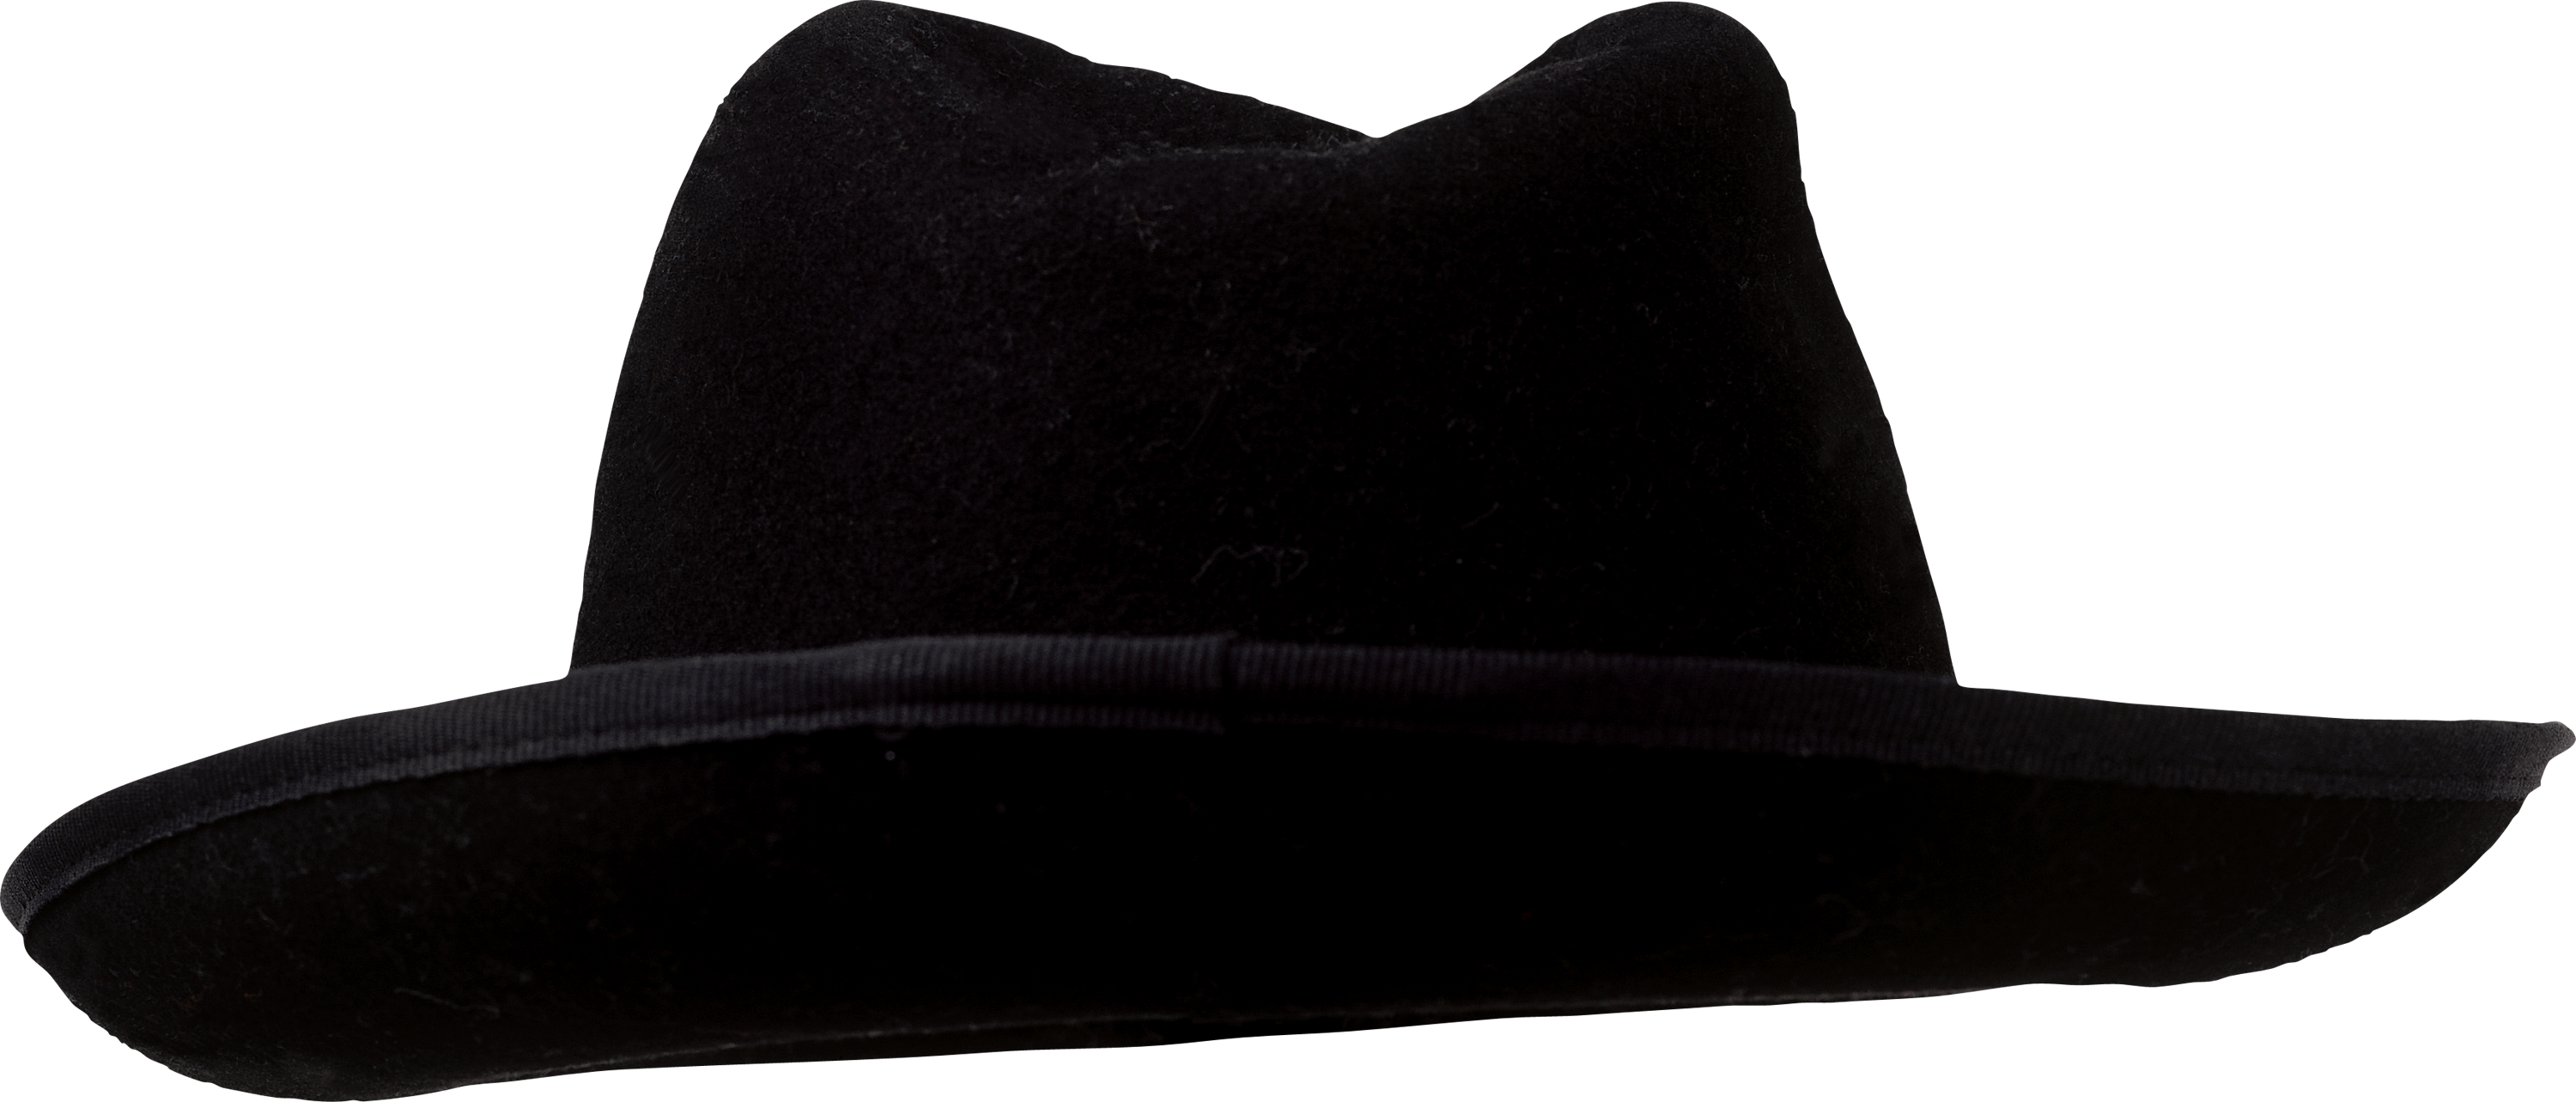 Hat PNG images free download